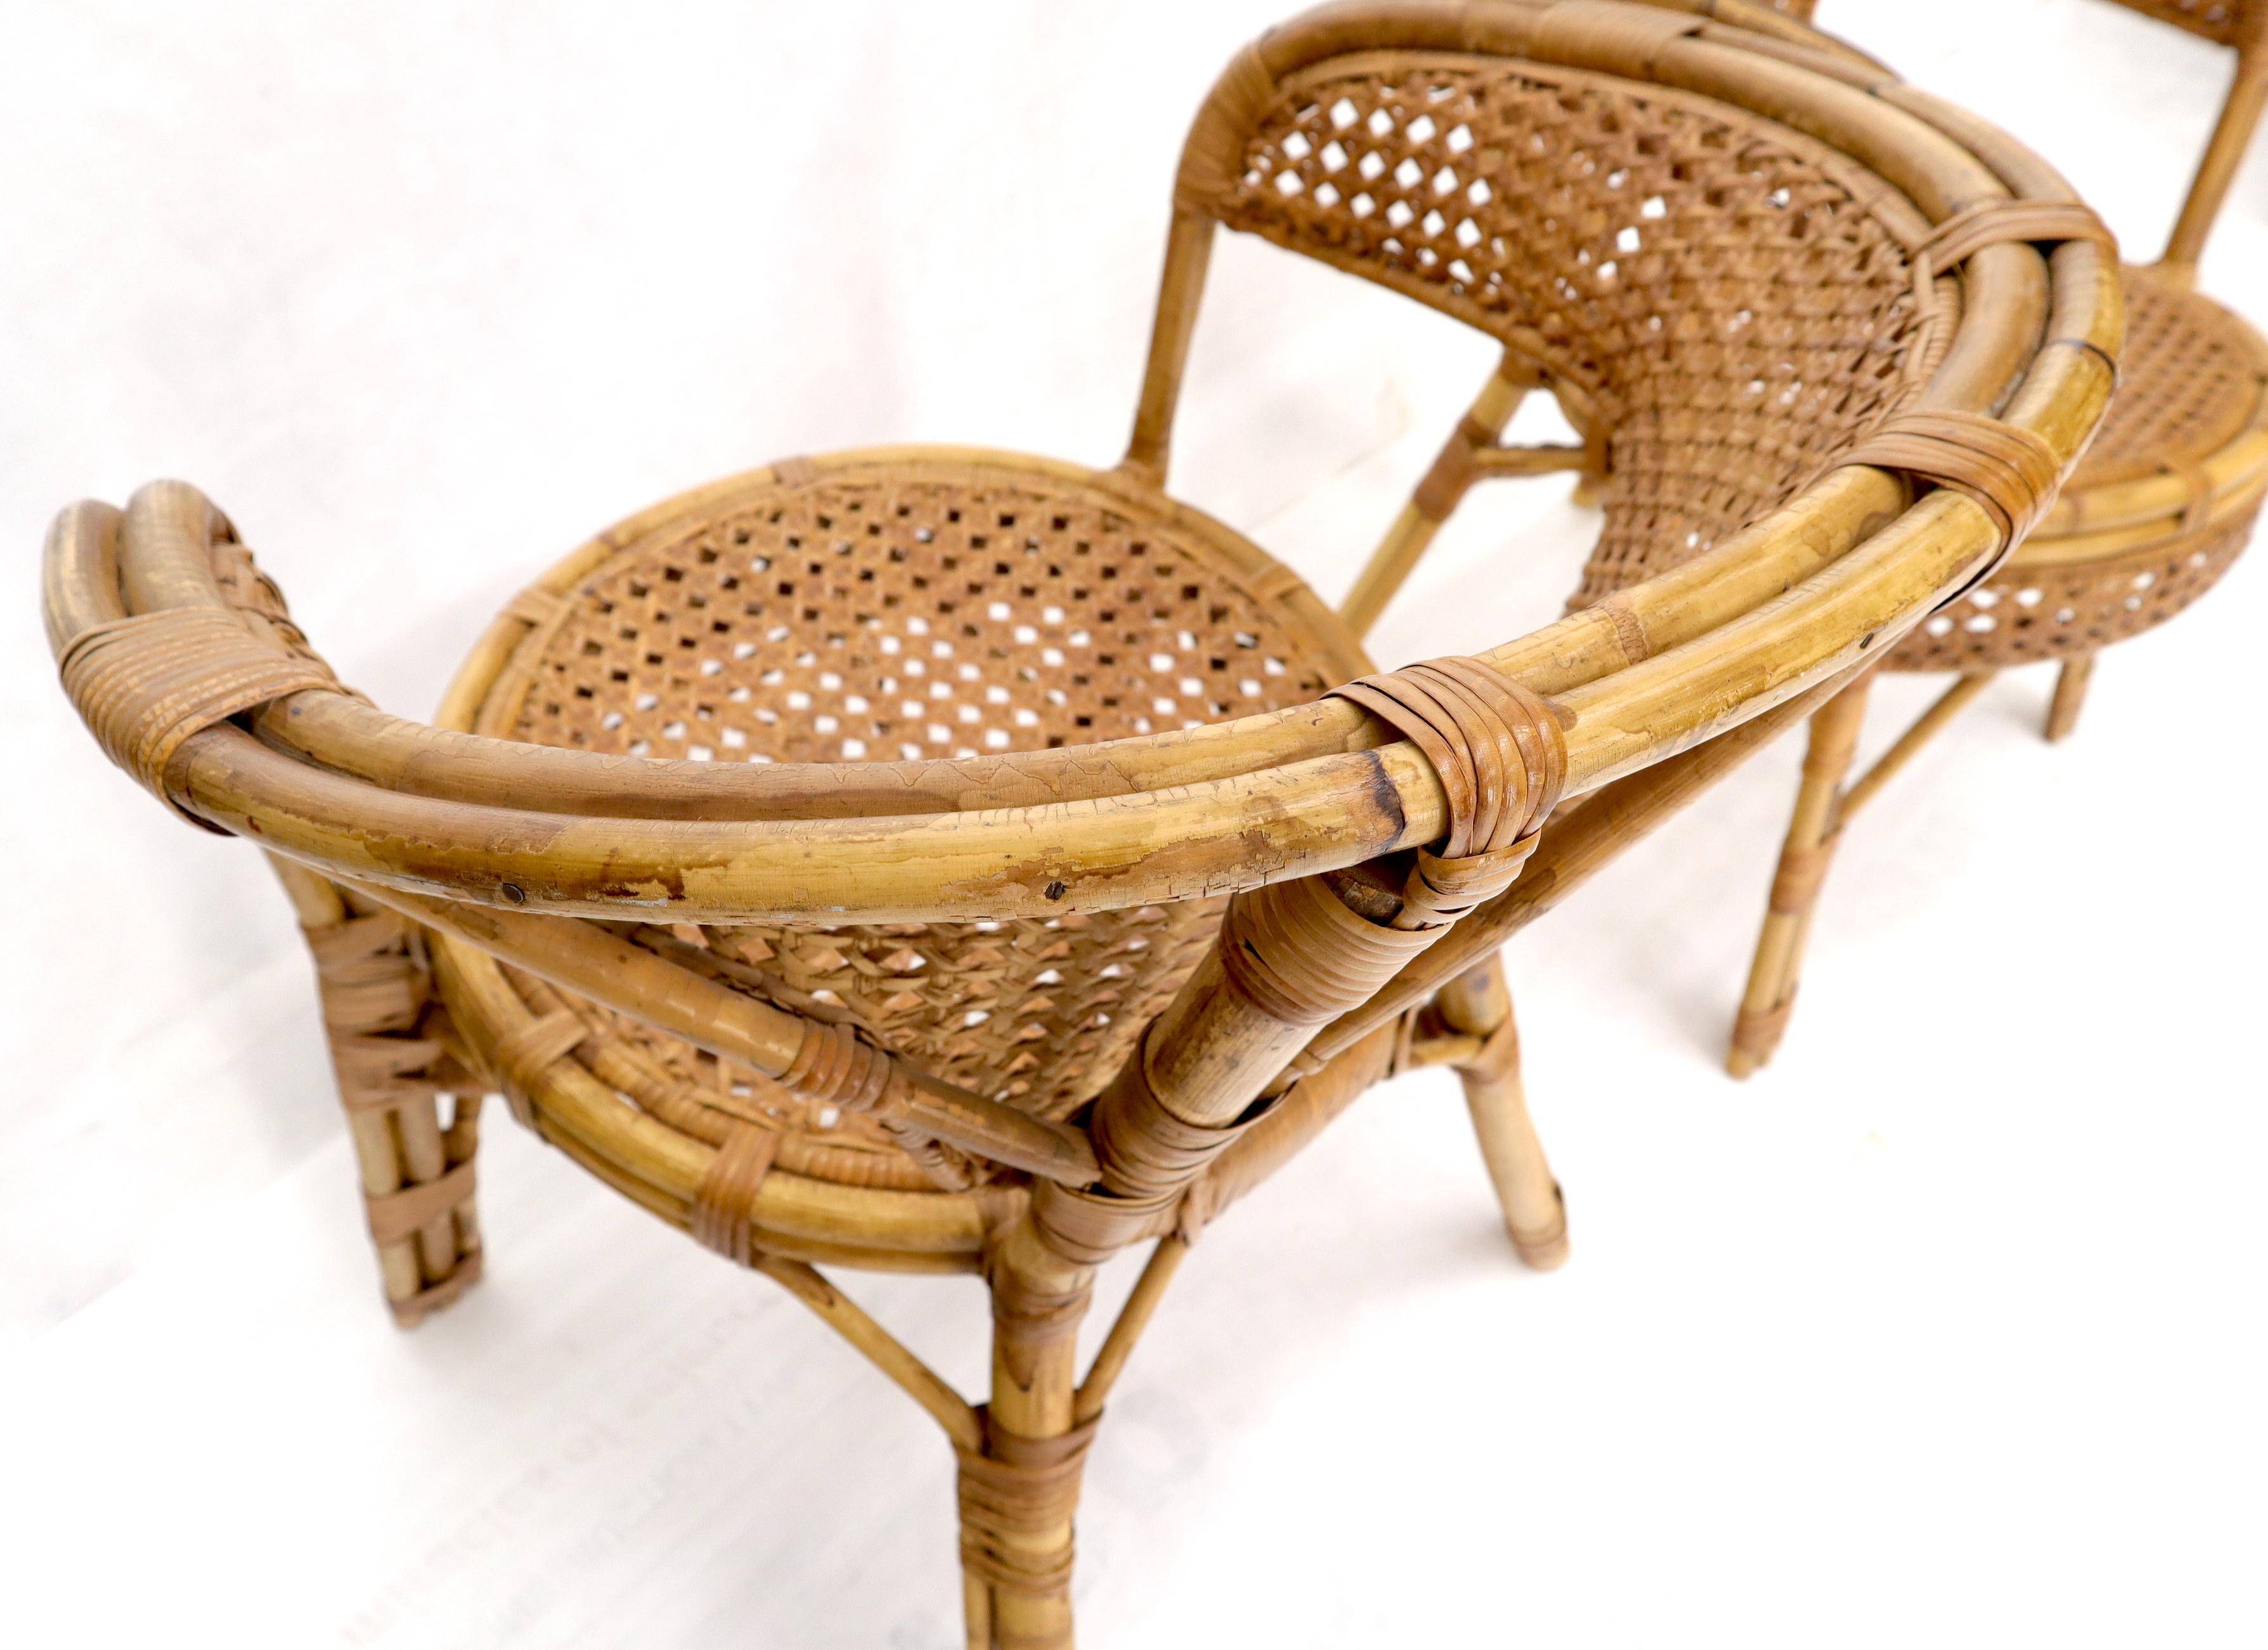 Pair of Stunning Round Barrel Shape Bamboo Rattan Cane Seat Chairs For Sale 5